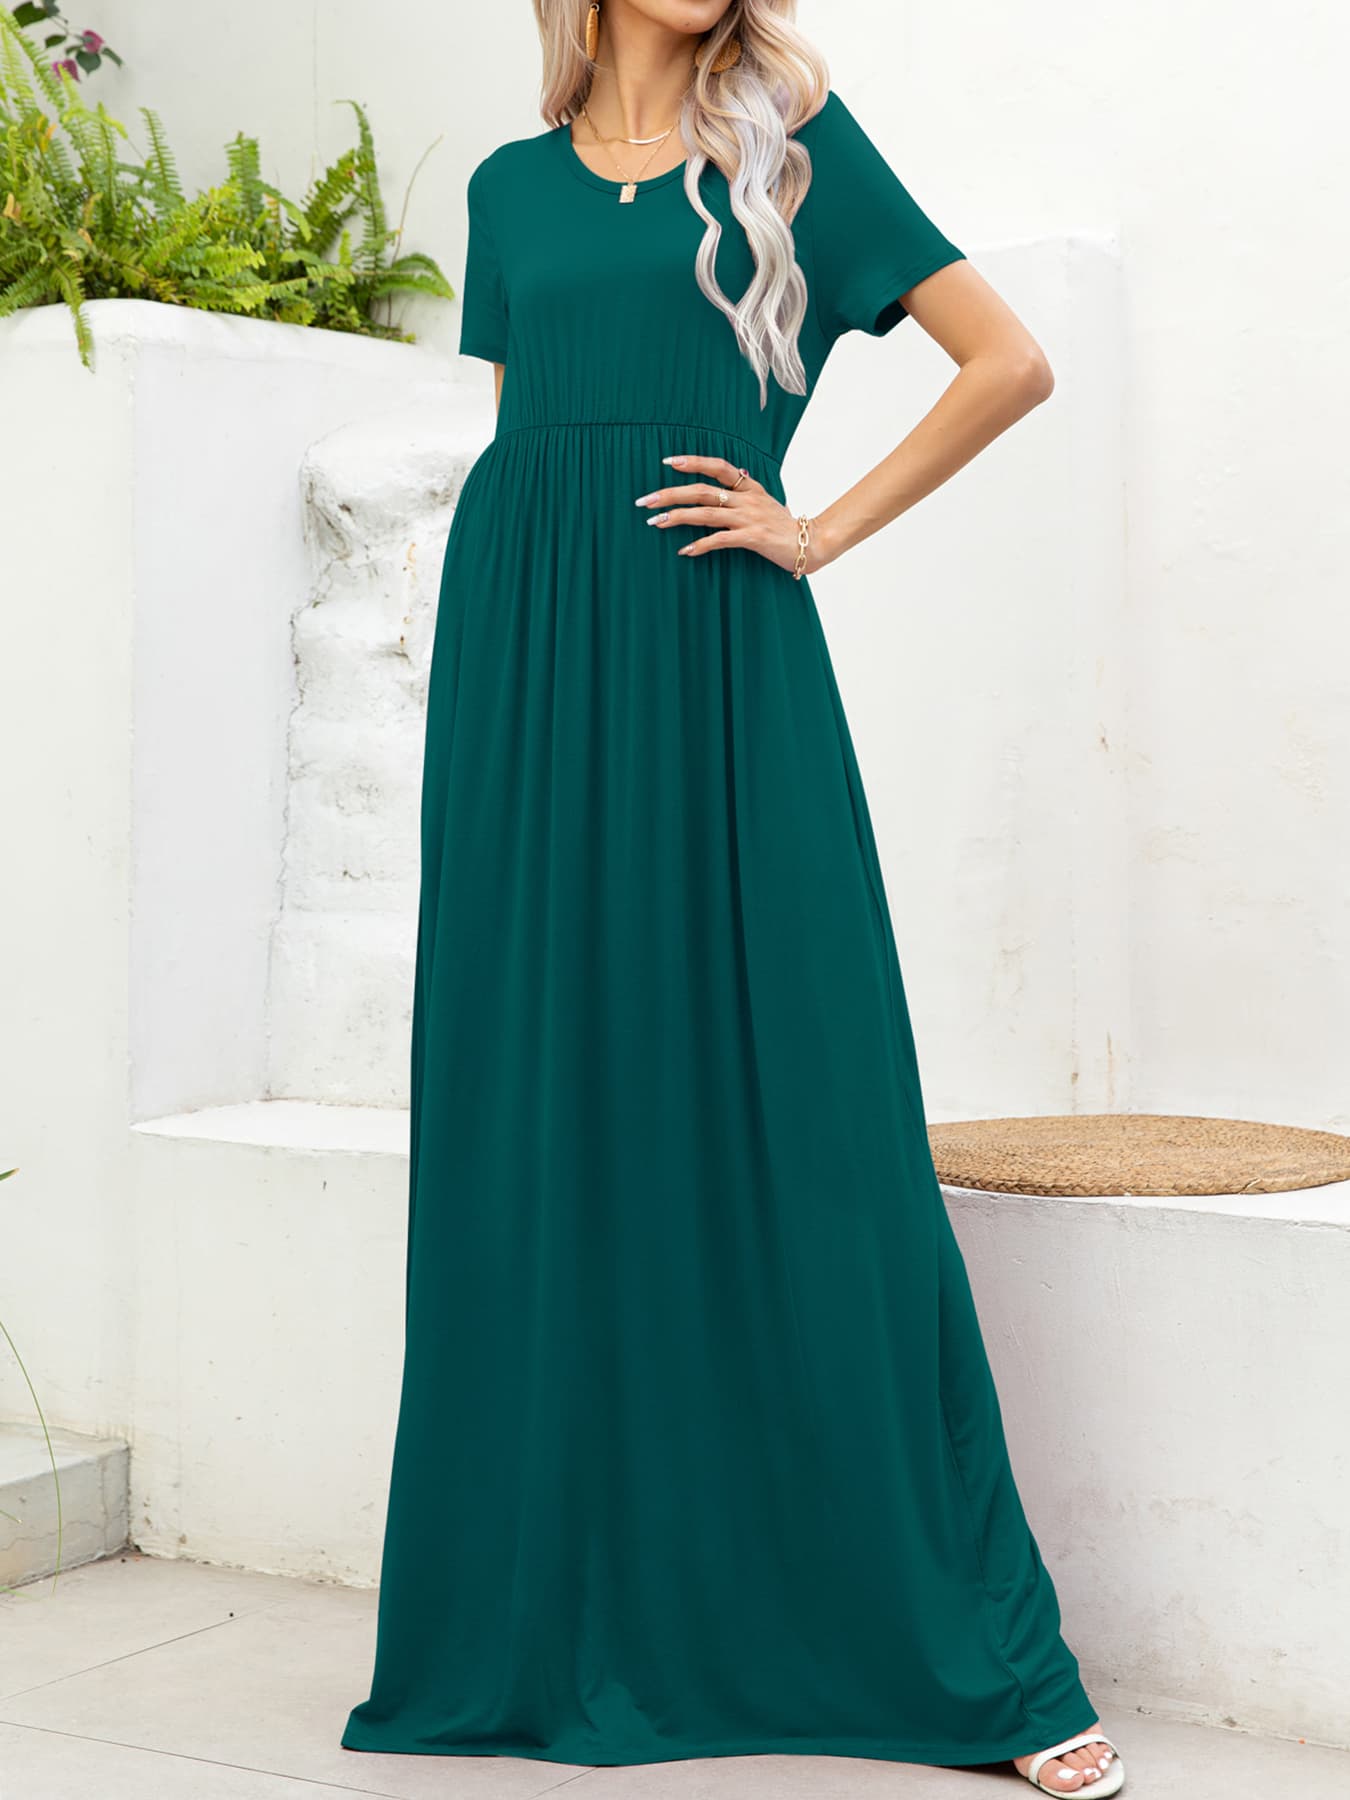 OCEANSIDE Round Neck Short Sleeve Maxi Dress with Pockets